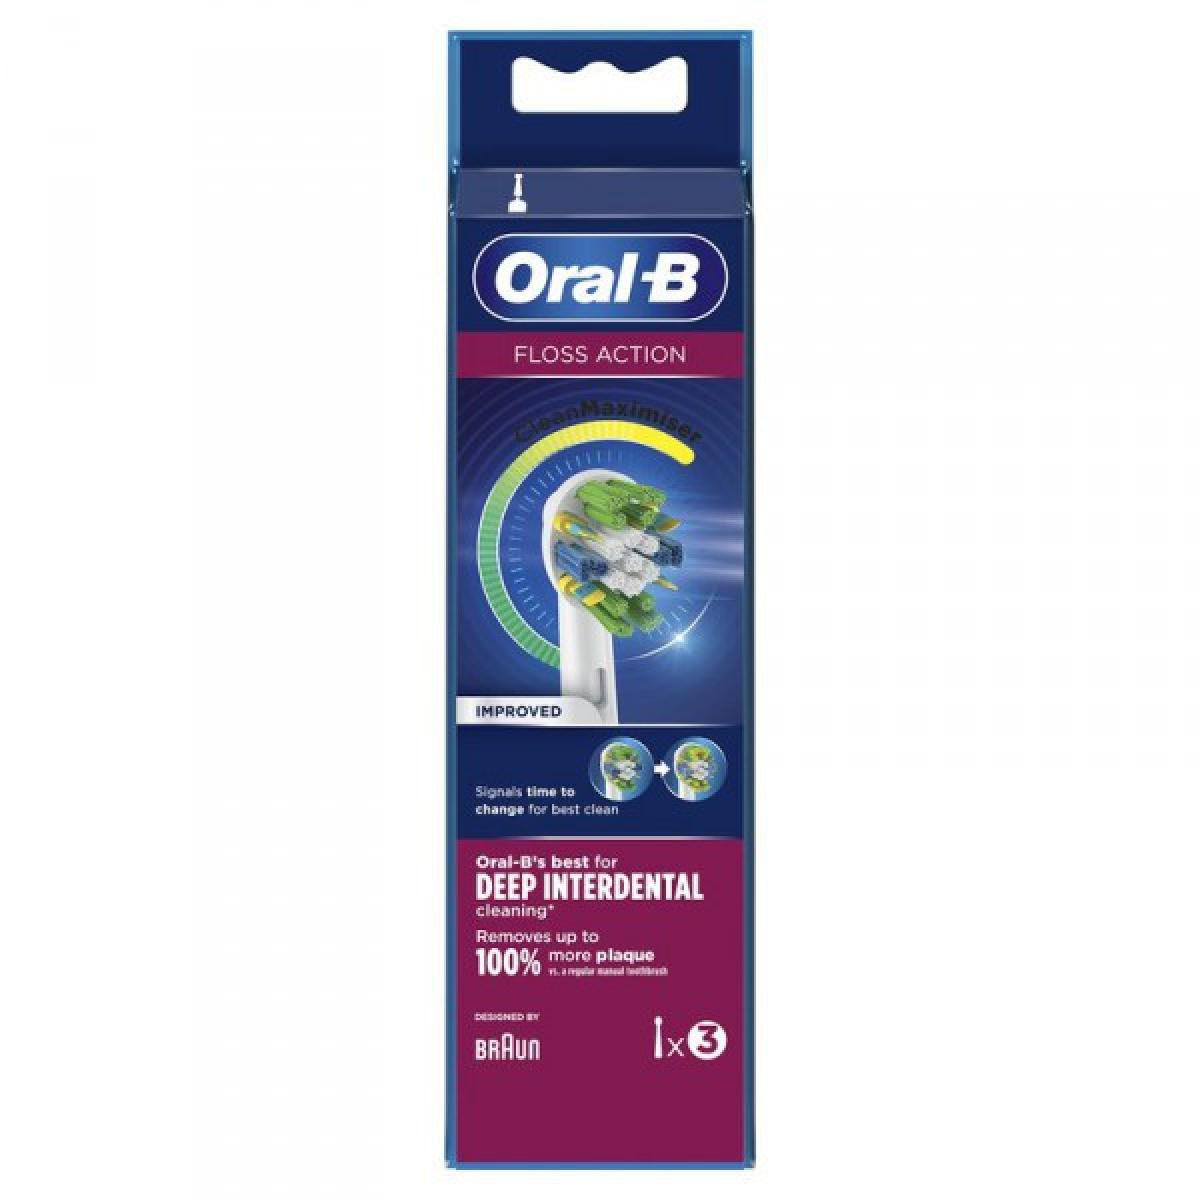 Oral-B - Brossette EB 25 X3 FLOSS ACTION - Kits interdentaires